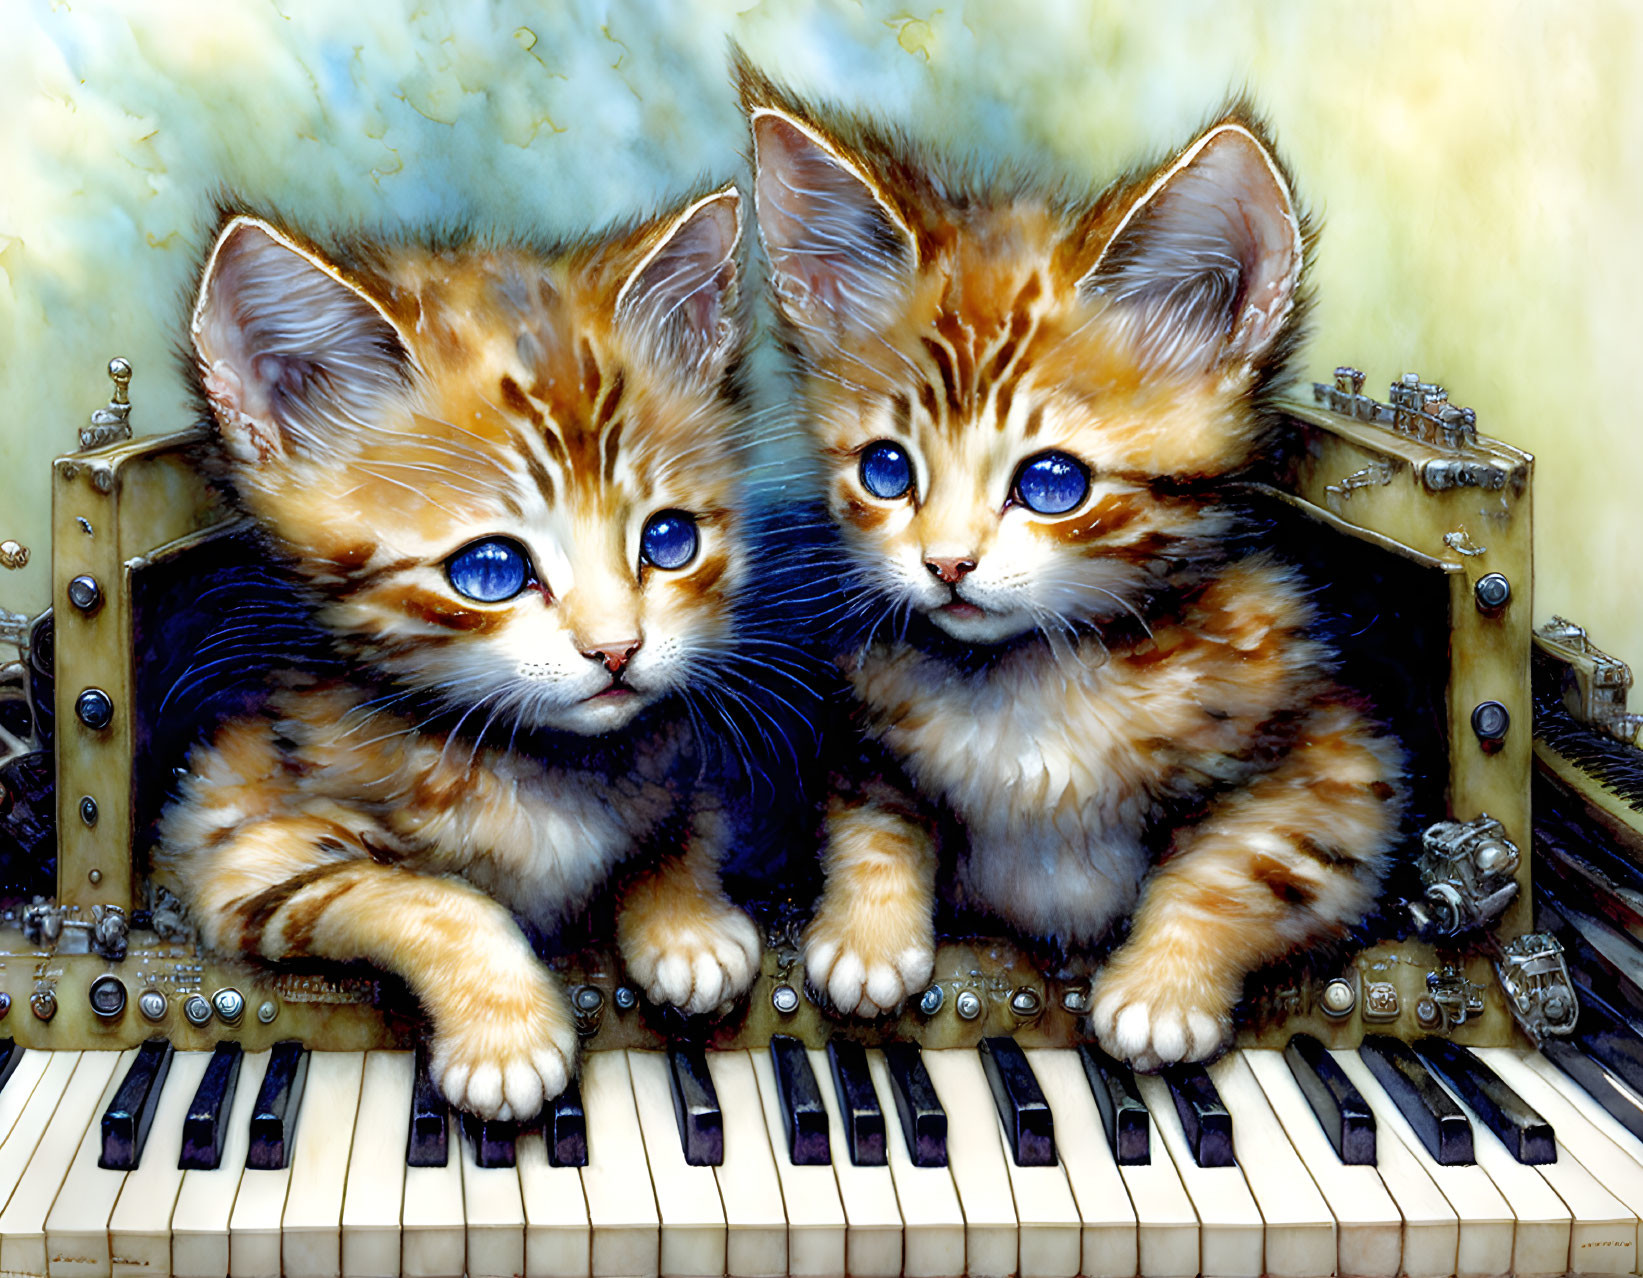 Blue-eyed kittens on piano keys with mechanical details and whimsical background